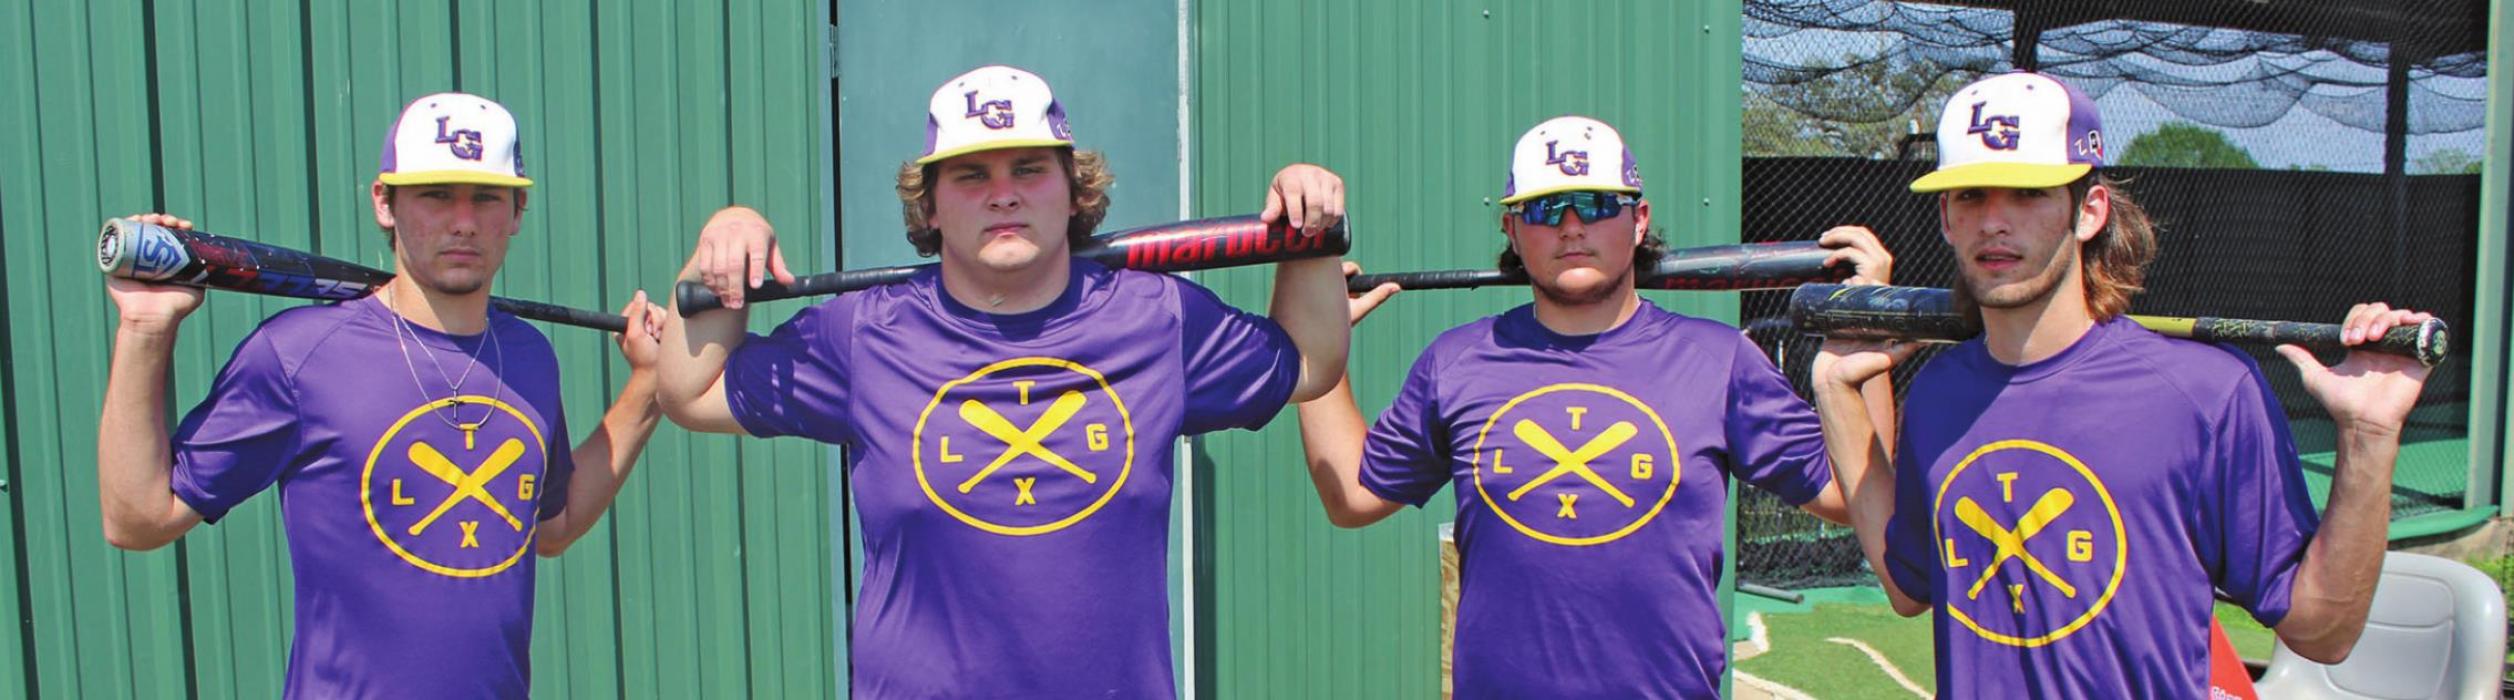 The senior members of the La Grange baseball team are trying to extend their high school careers if they can get past Salado in a first round playoff series this weekend. Left to right, those seniors are: Wyatt Wick, Braeden Wilder, Kaleb Pyle and Colby Spann. Photo by Jeff Wick